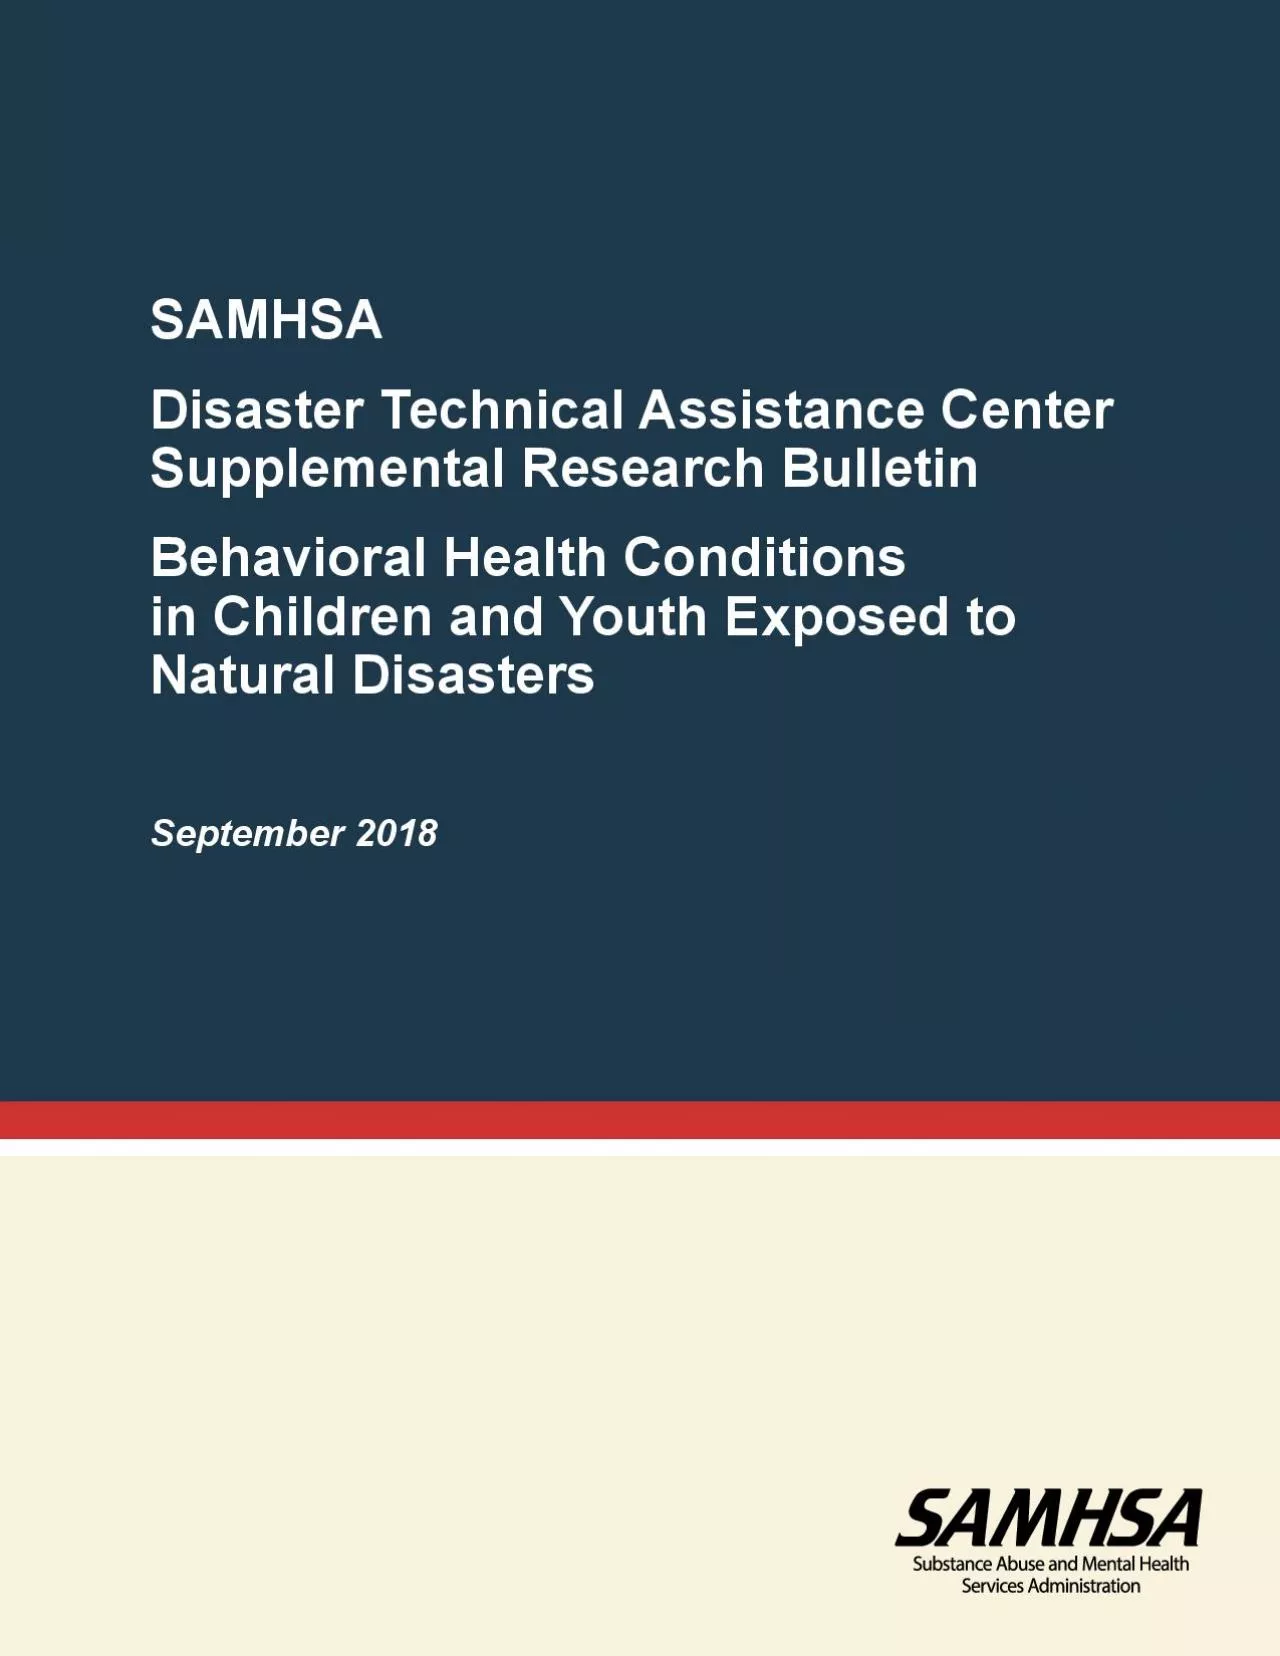 Disaster Technical Assistance Center in Children and Youth Exposed to